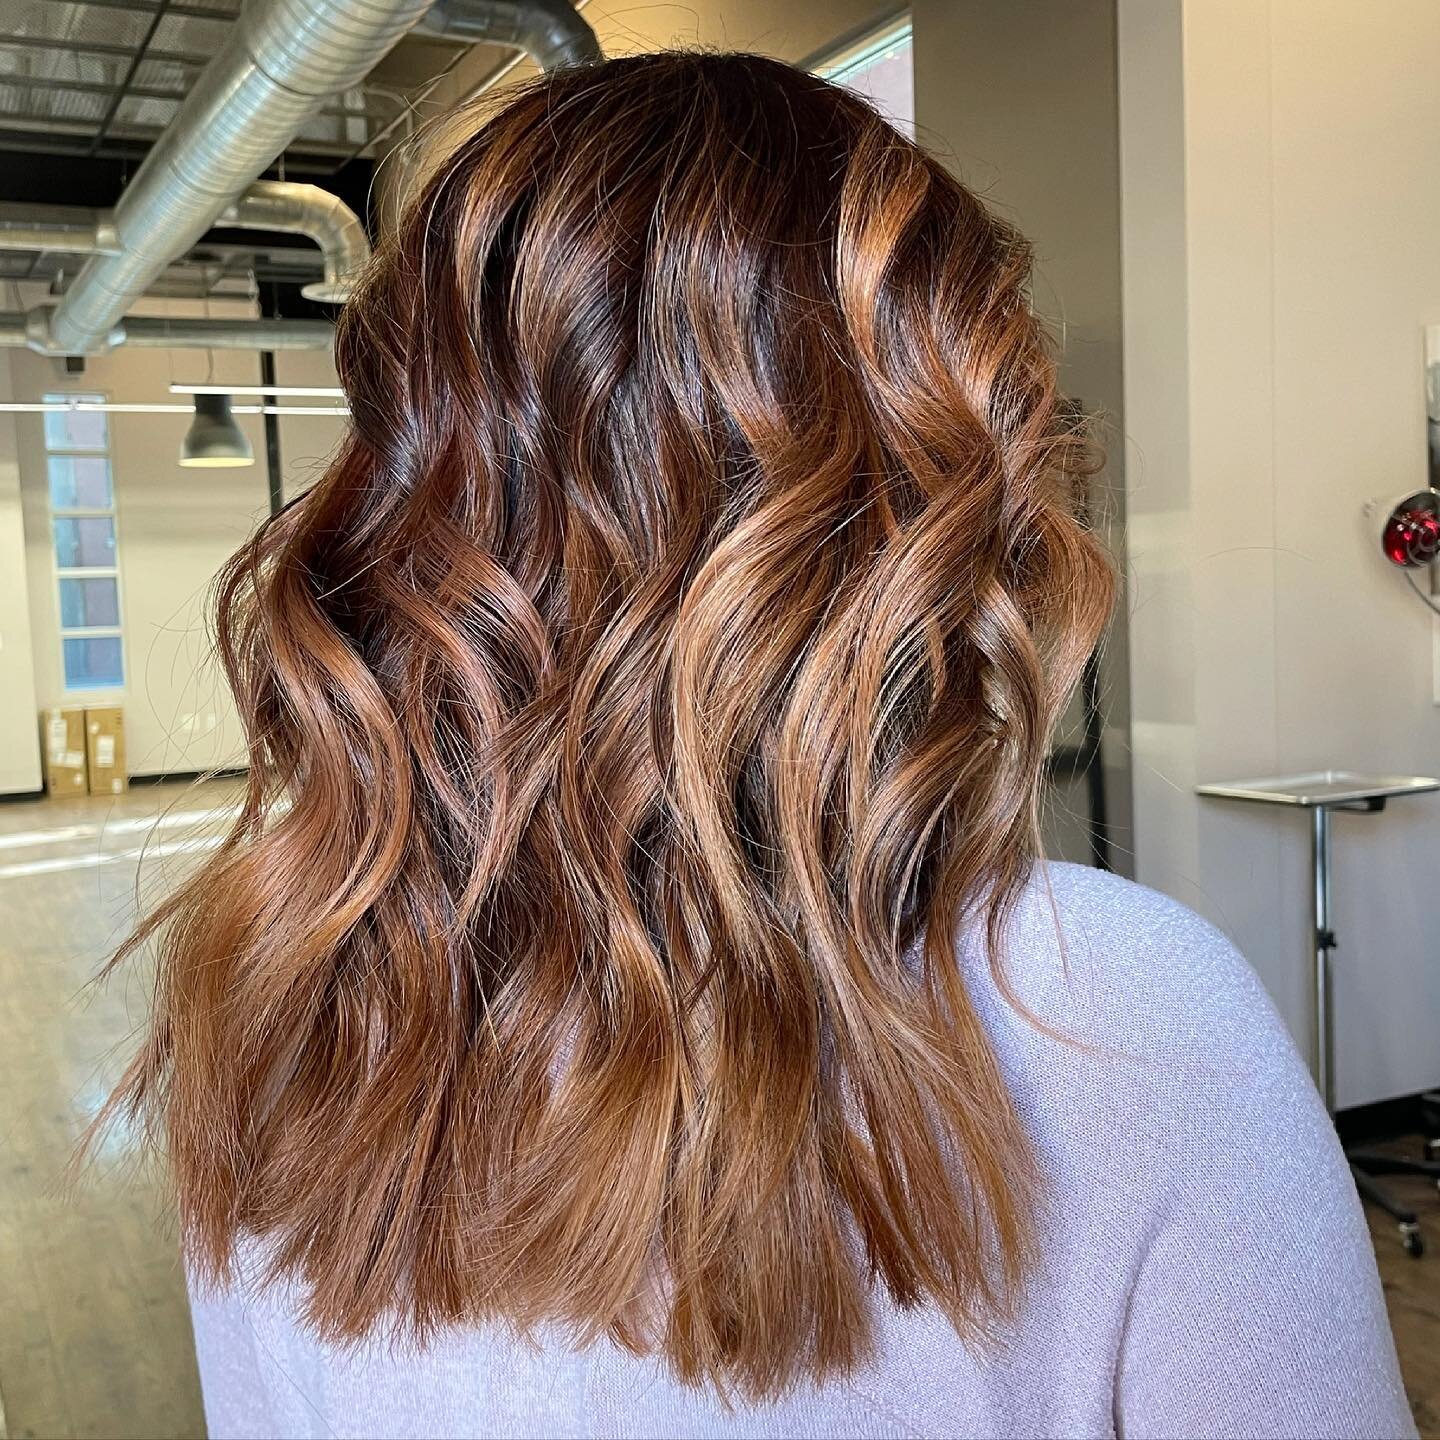 September is almost booked!! Book ahead! No one likes disappointments!
#colorcorrection 
#montecillolife #elpasohairstylist #elpasohair #elpasocolorcorrection #elpasobalayage #babylights #balayage #blondes #colorcorrections #schwarzkopf #schwarzkopfu